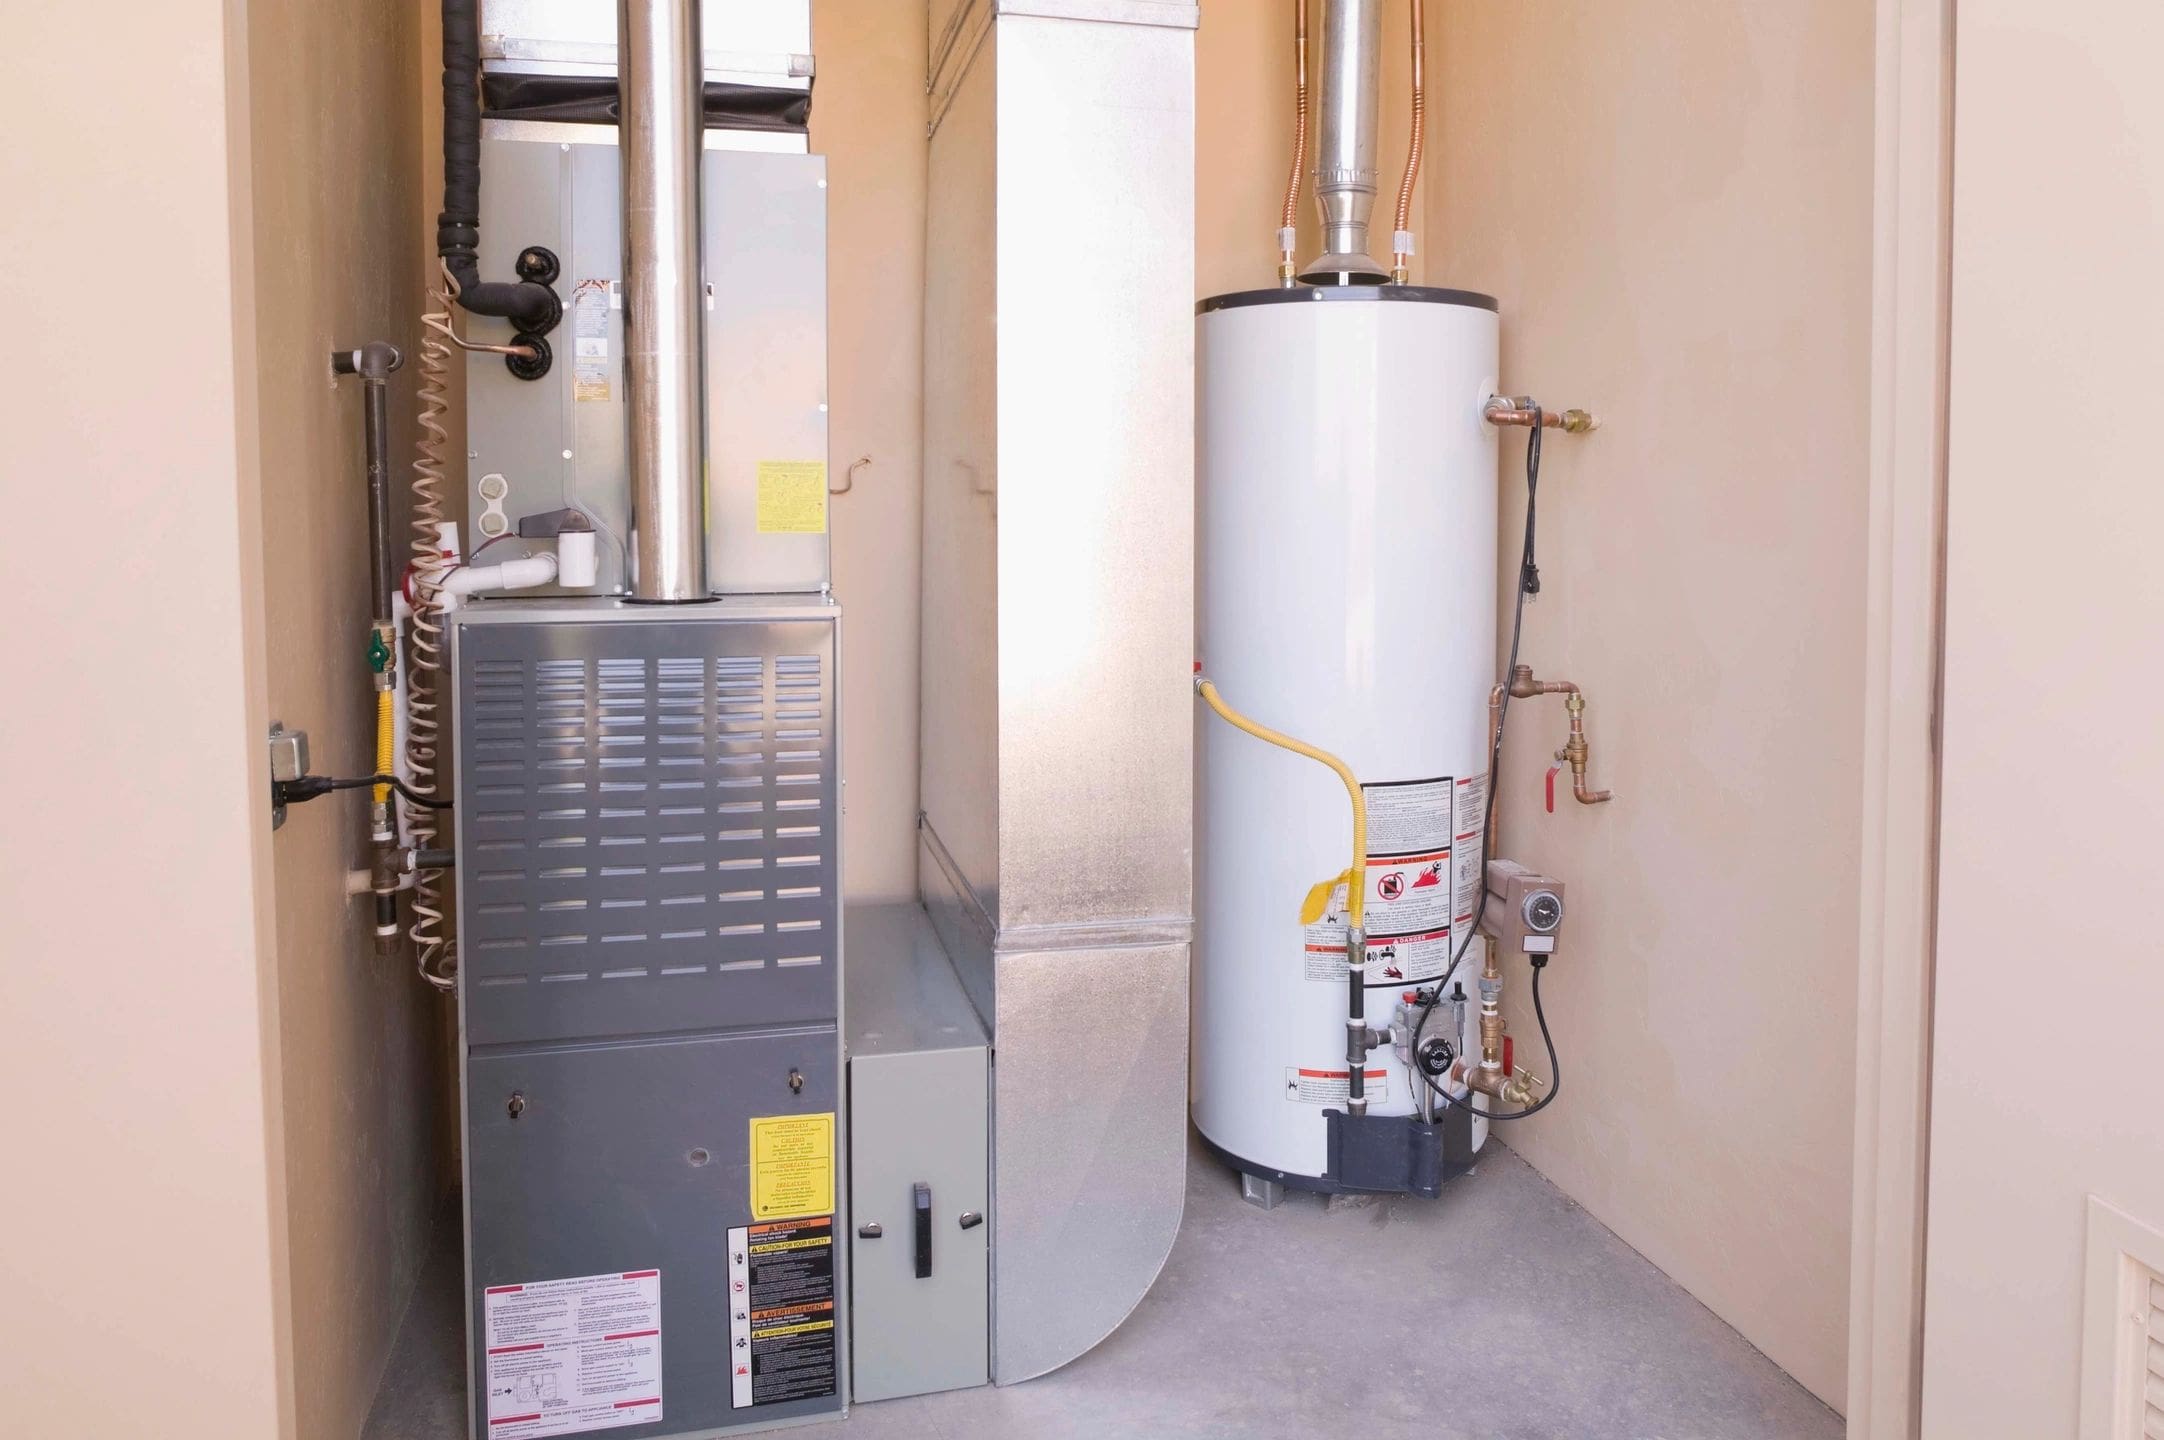 A furnace and hot water heater equipment.